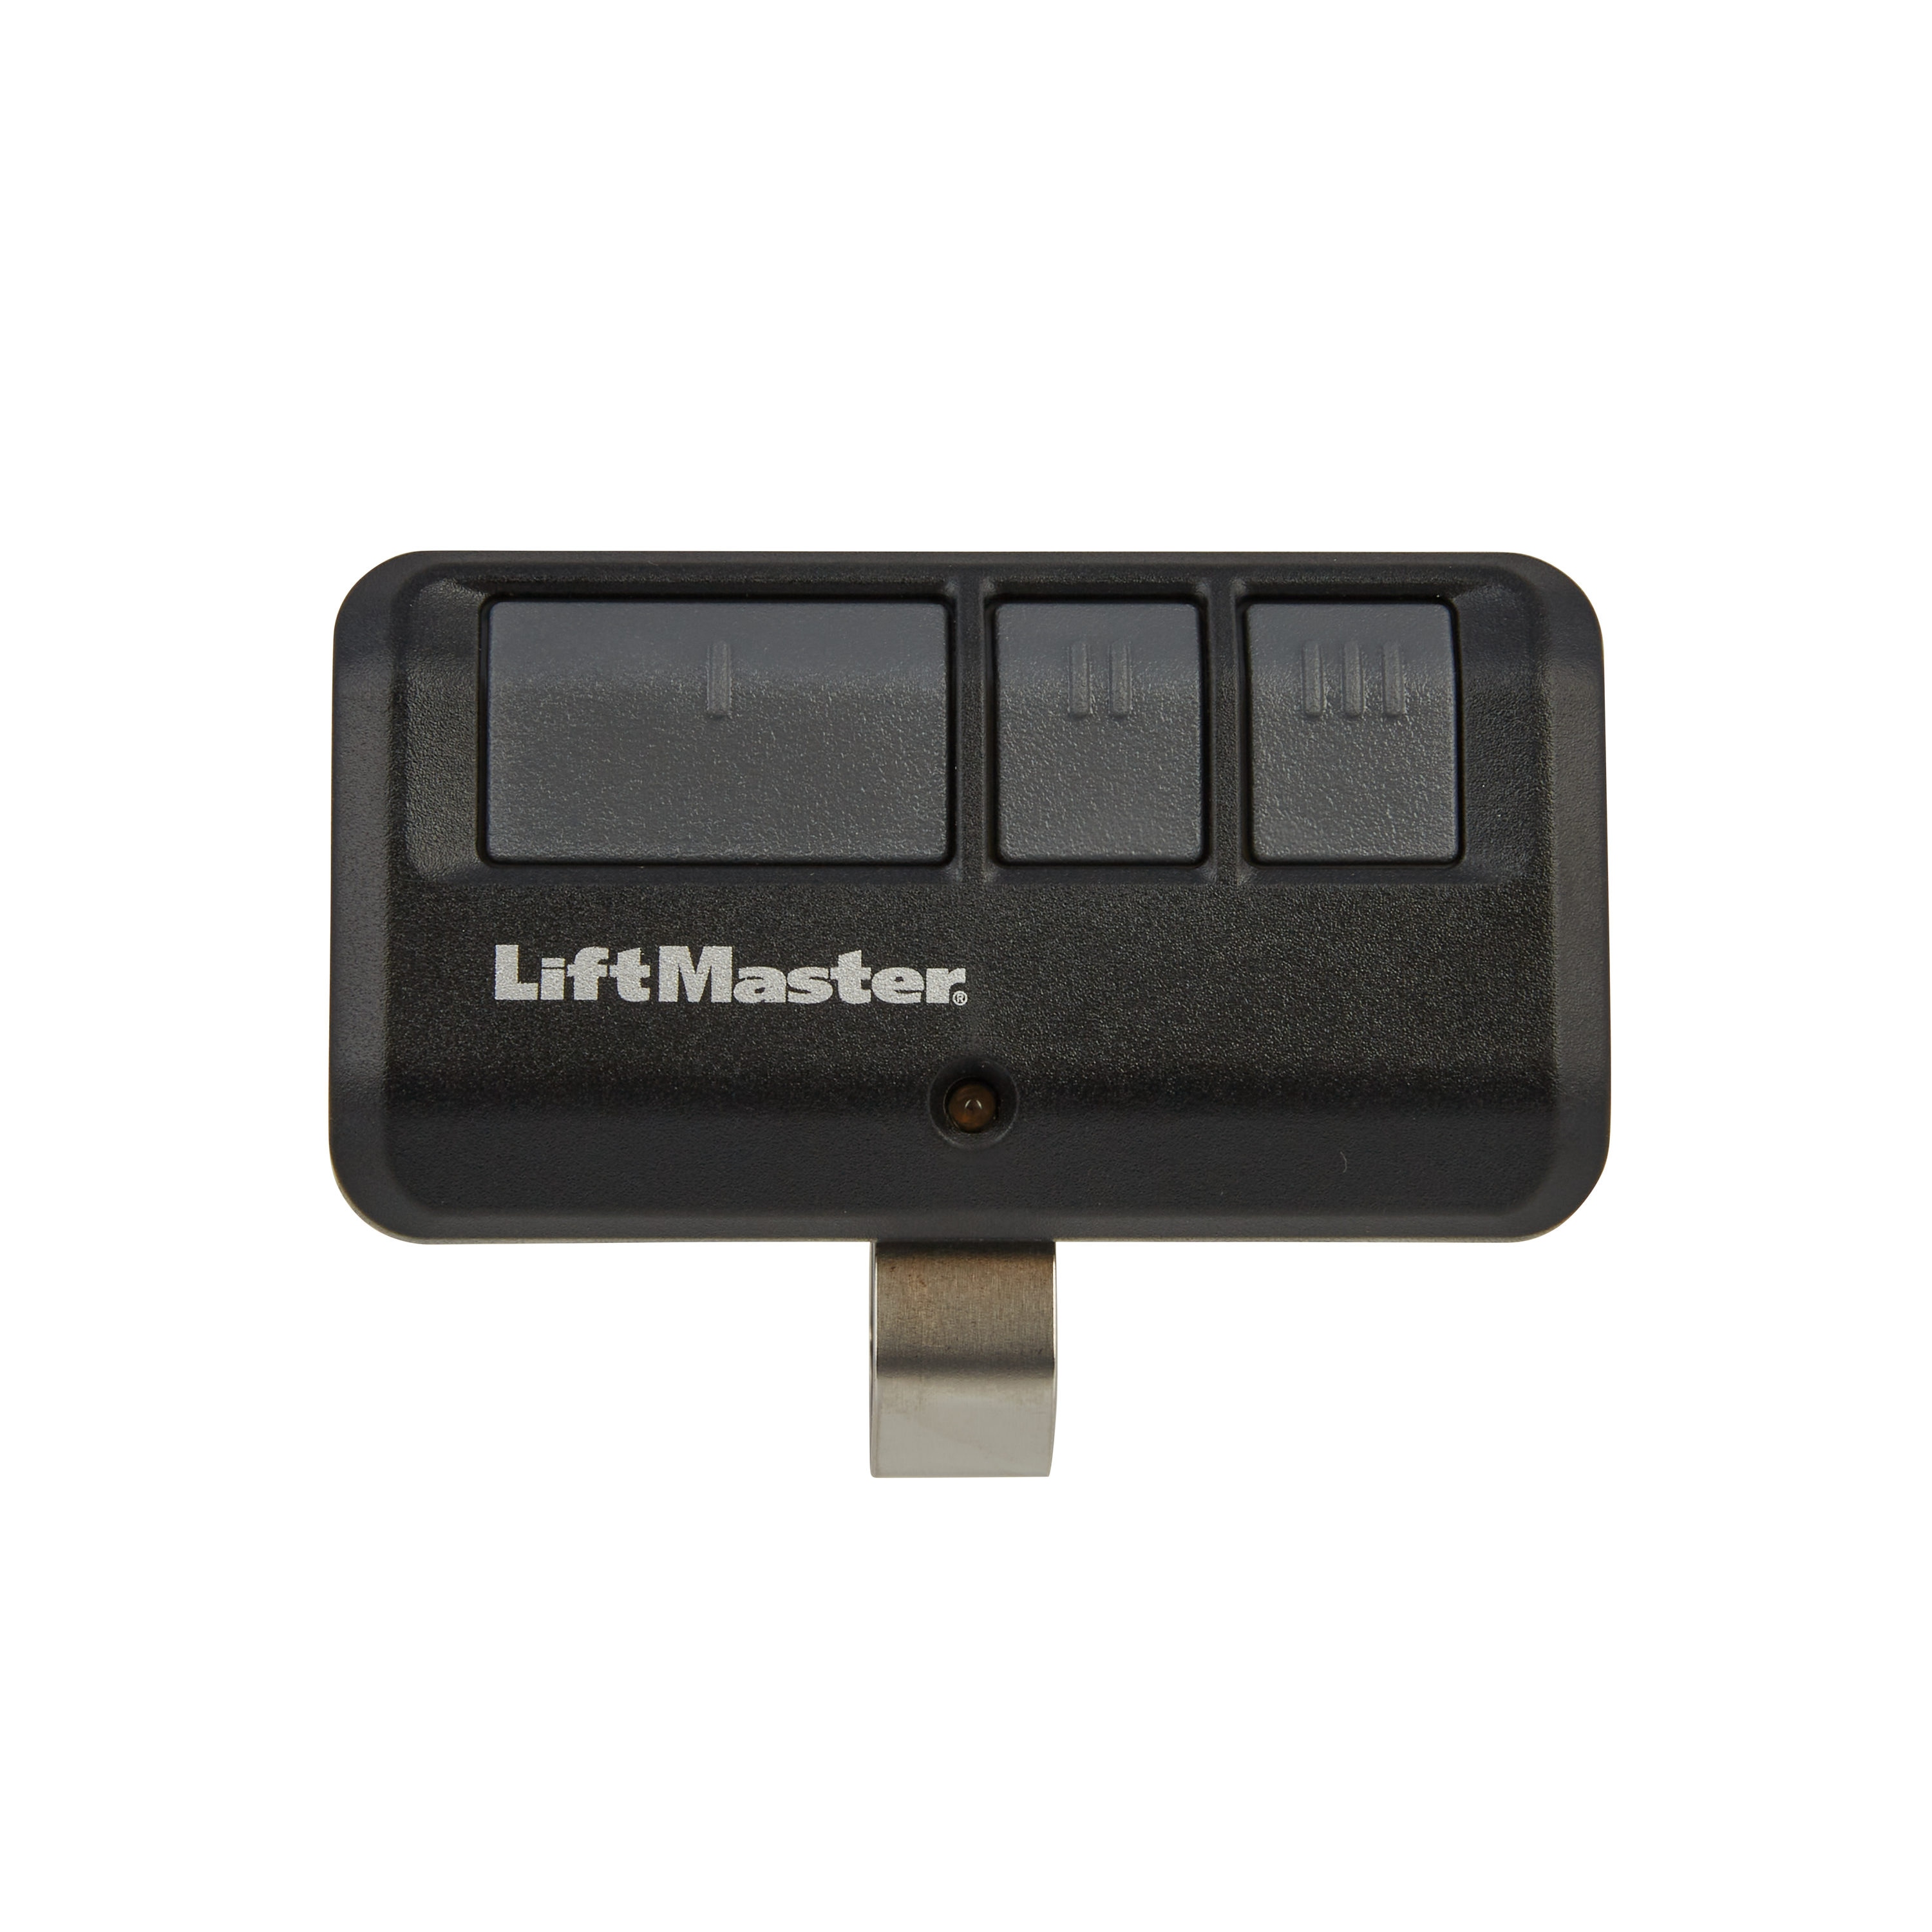 2.0 Remote for Garage Door Security 893LM LiftMaster 3 Button Transmitter 